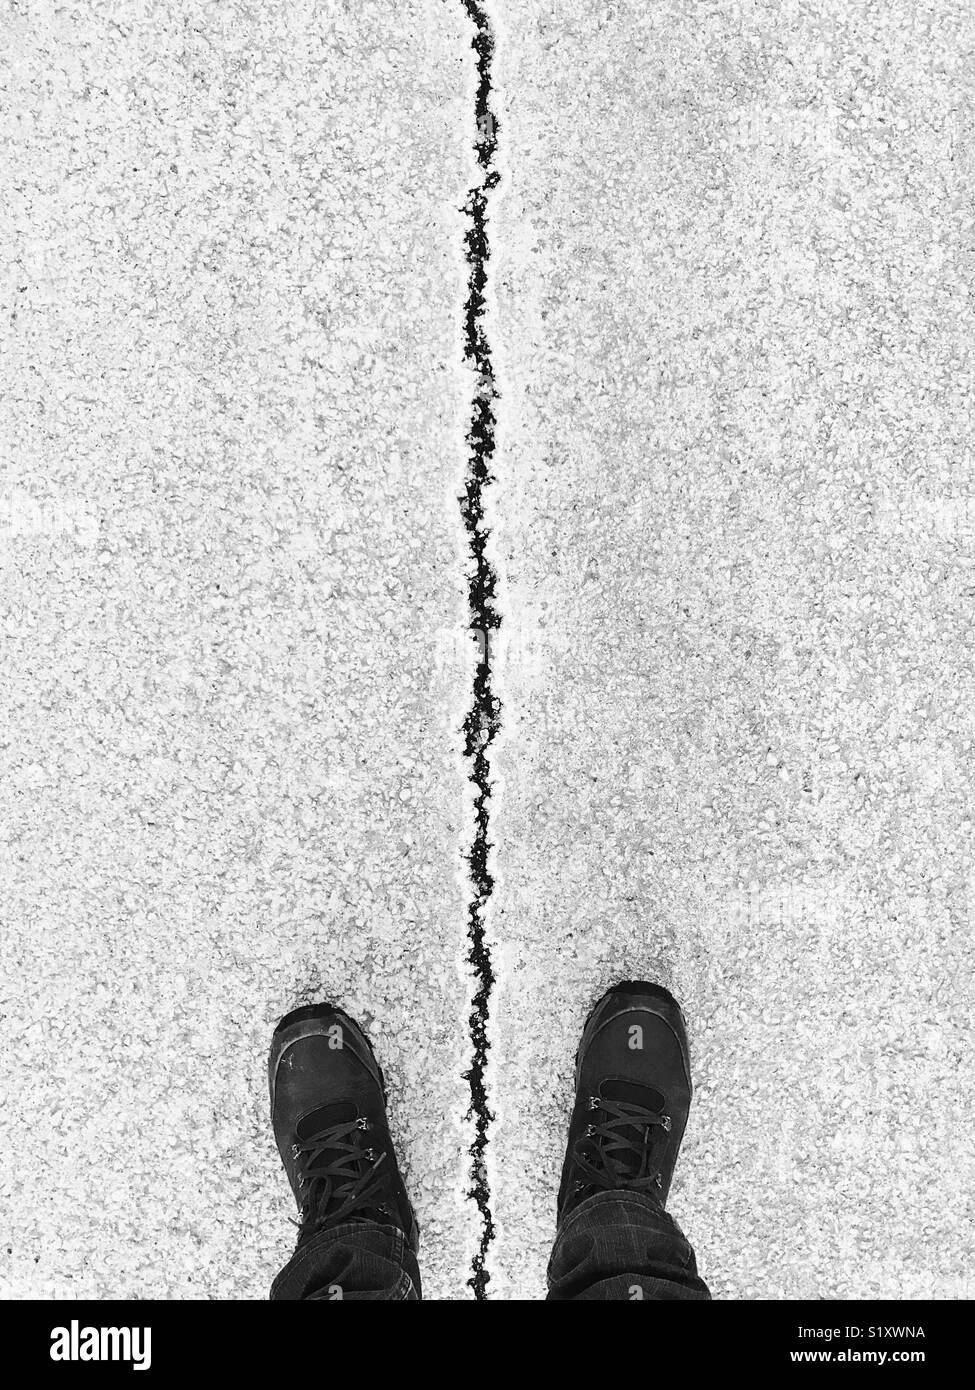 First-person perspective of a man's feet standing either side of a large vertical crack in the road. Stock Photo